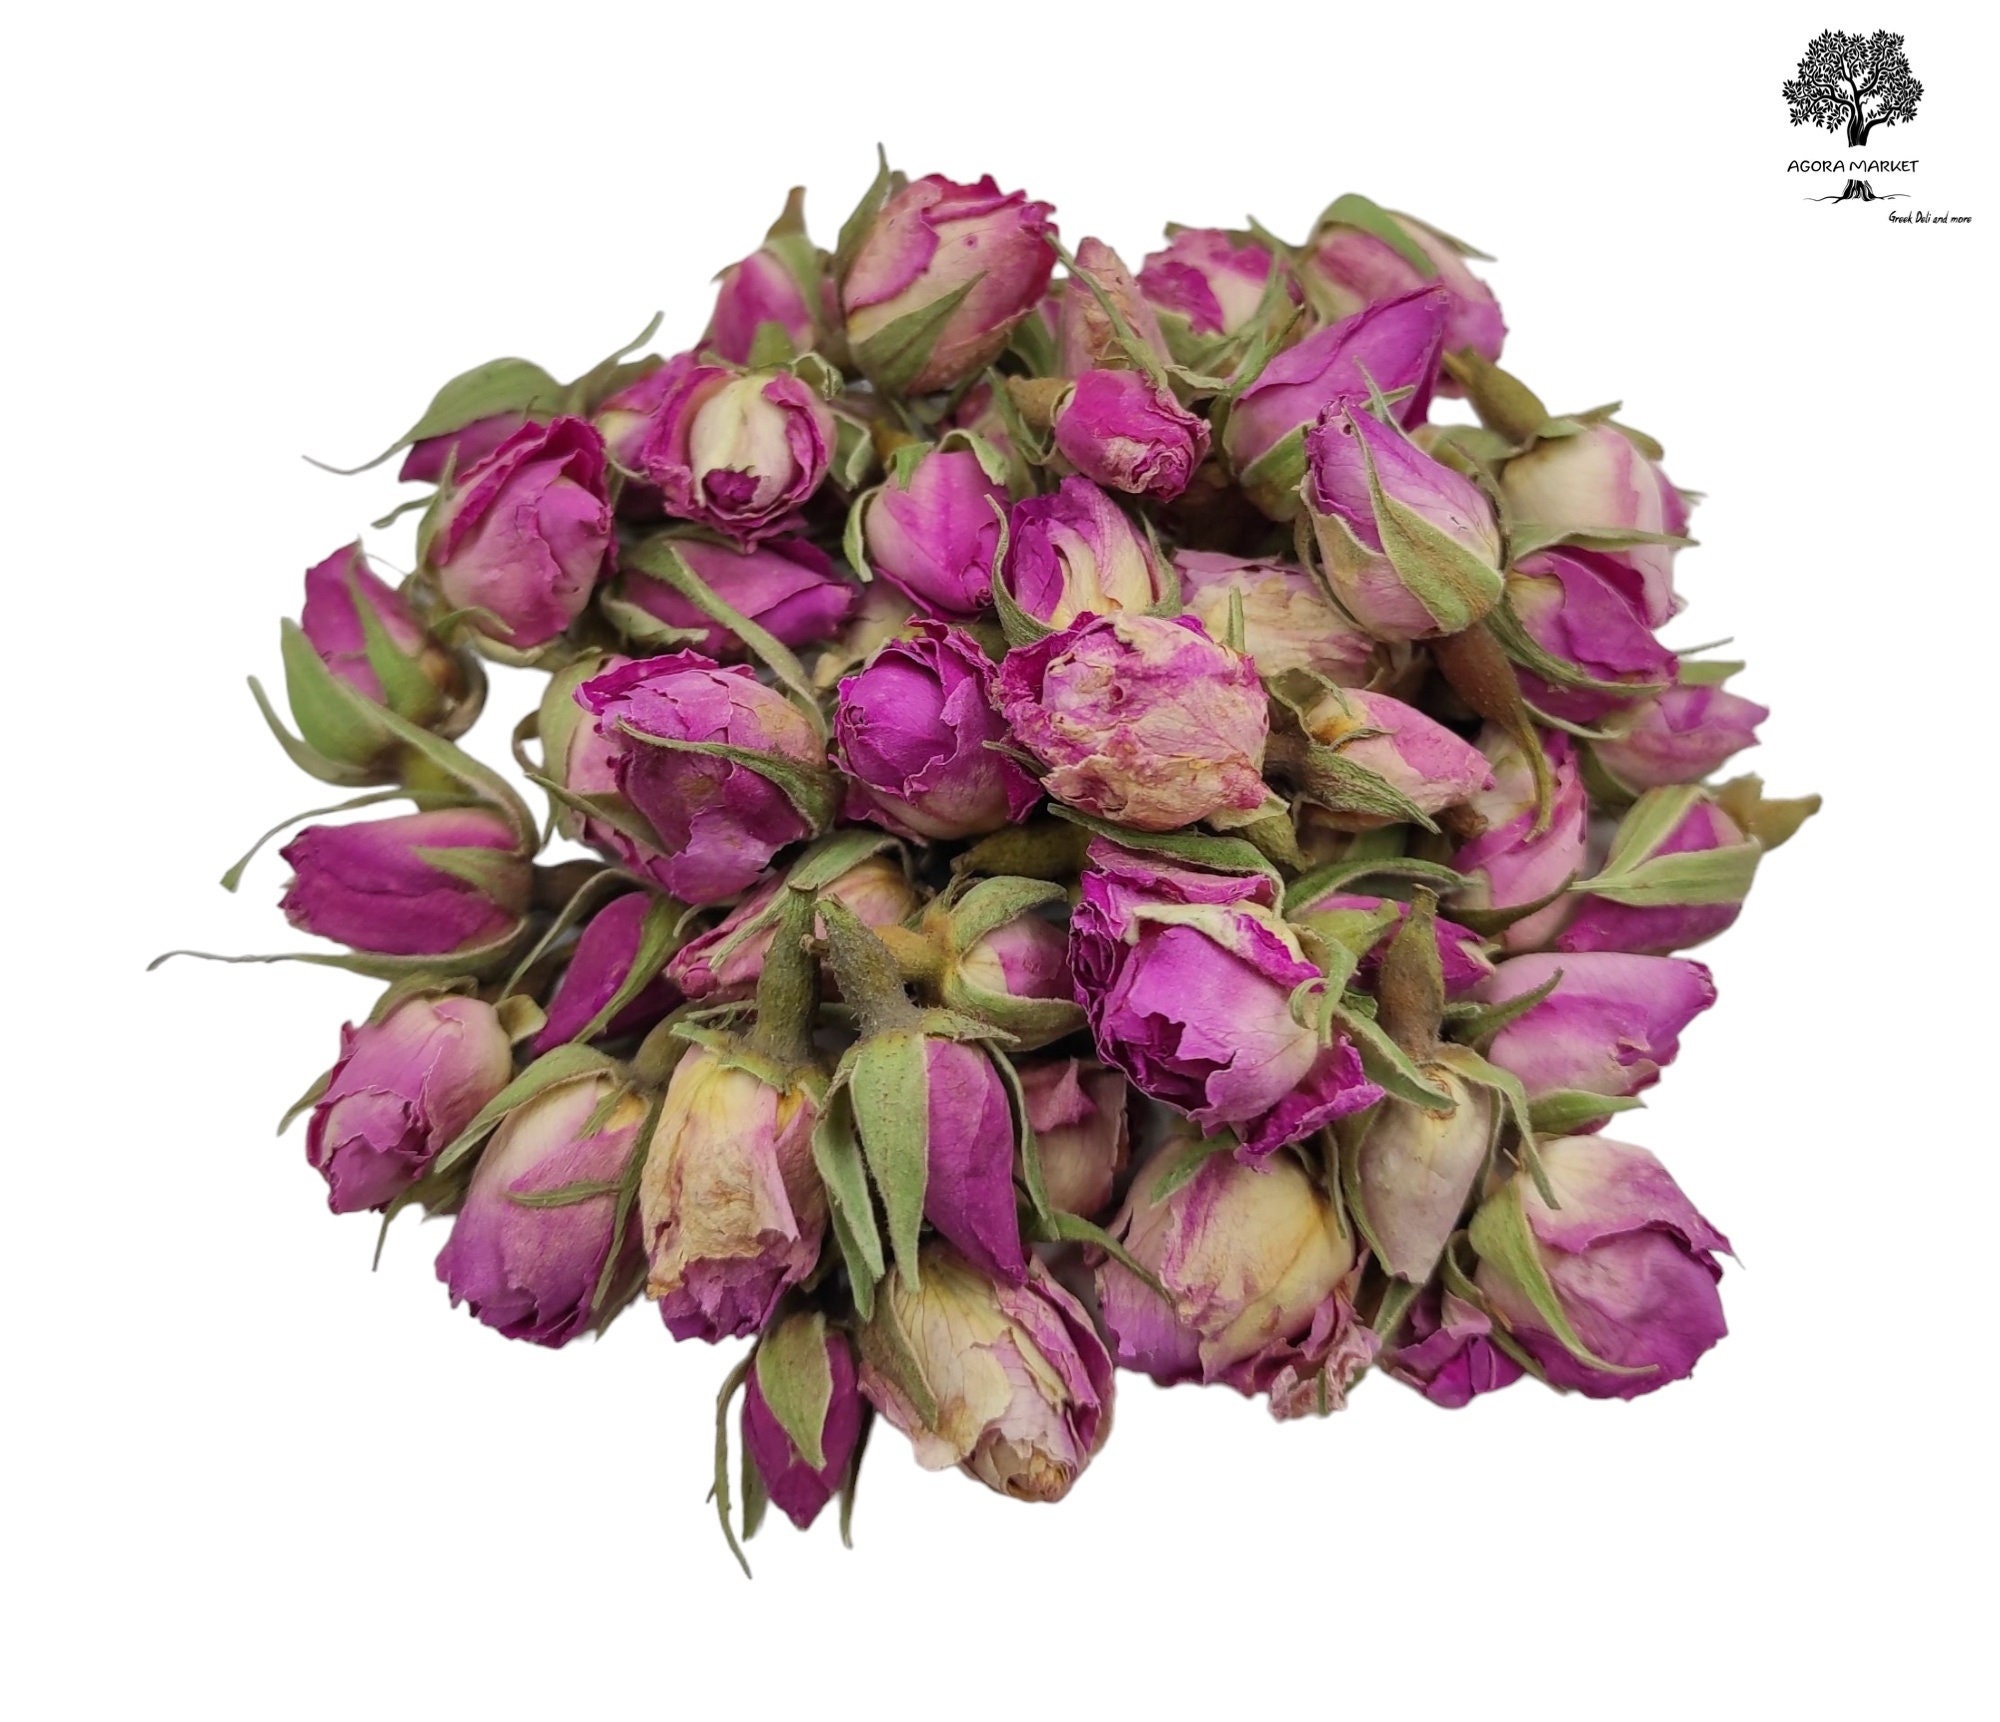 Red Rose Buds & Petals Organic Dried Herbs Dried Red Rose Petals Herbalism  Rose Water Aromatherapy Altar Supply Herbal Teas 